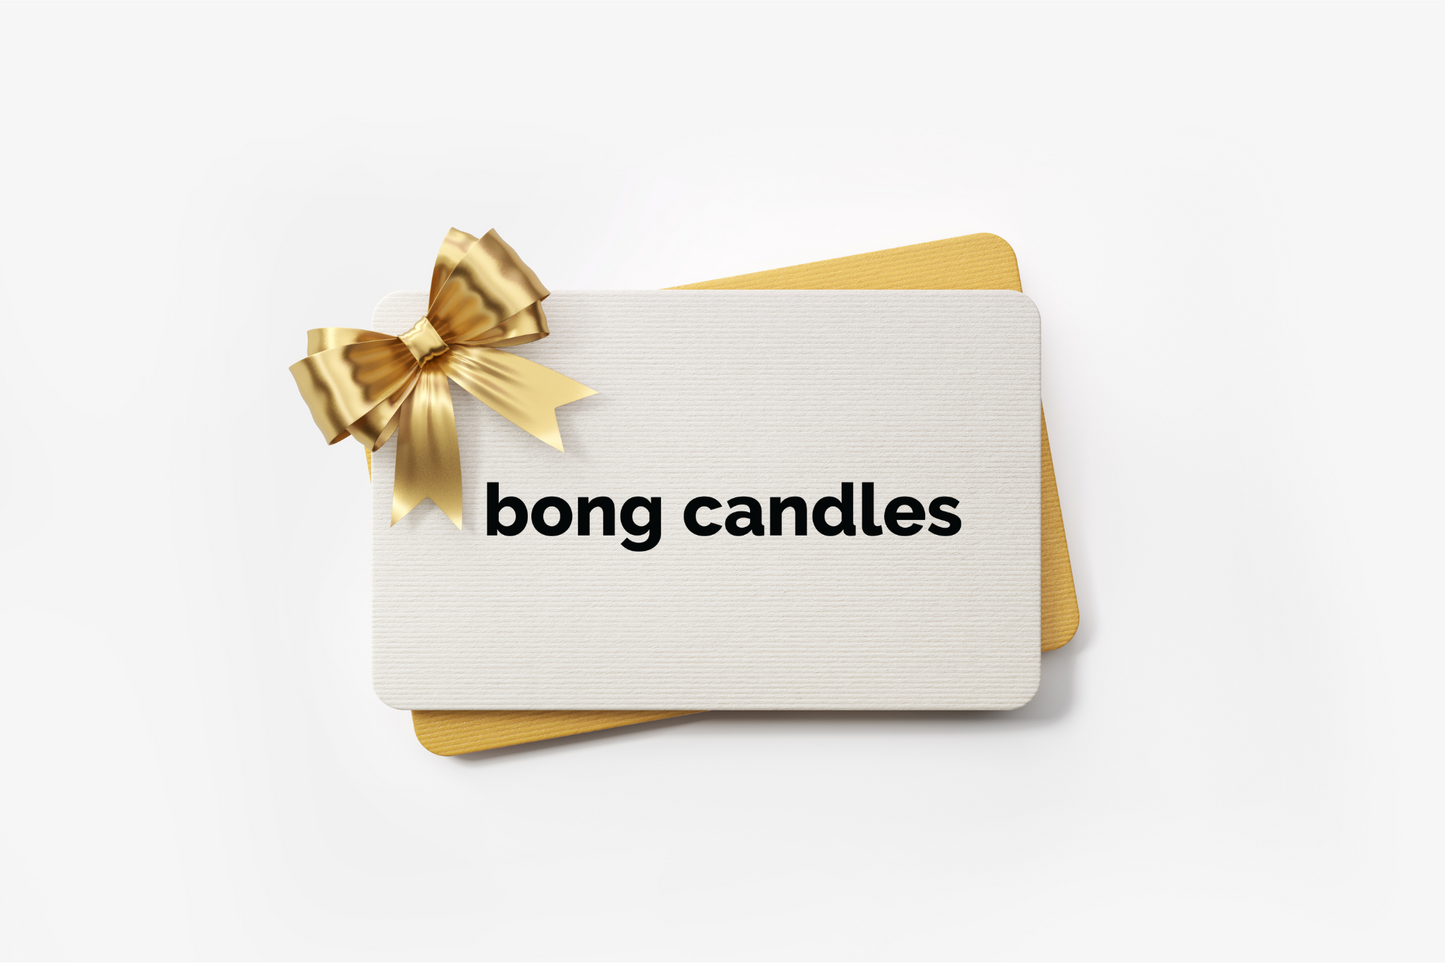 gift card, bong candles gift cards, candle gift cards